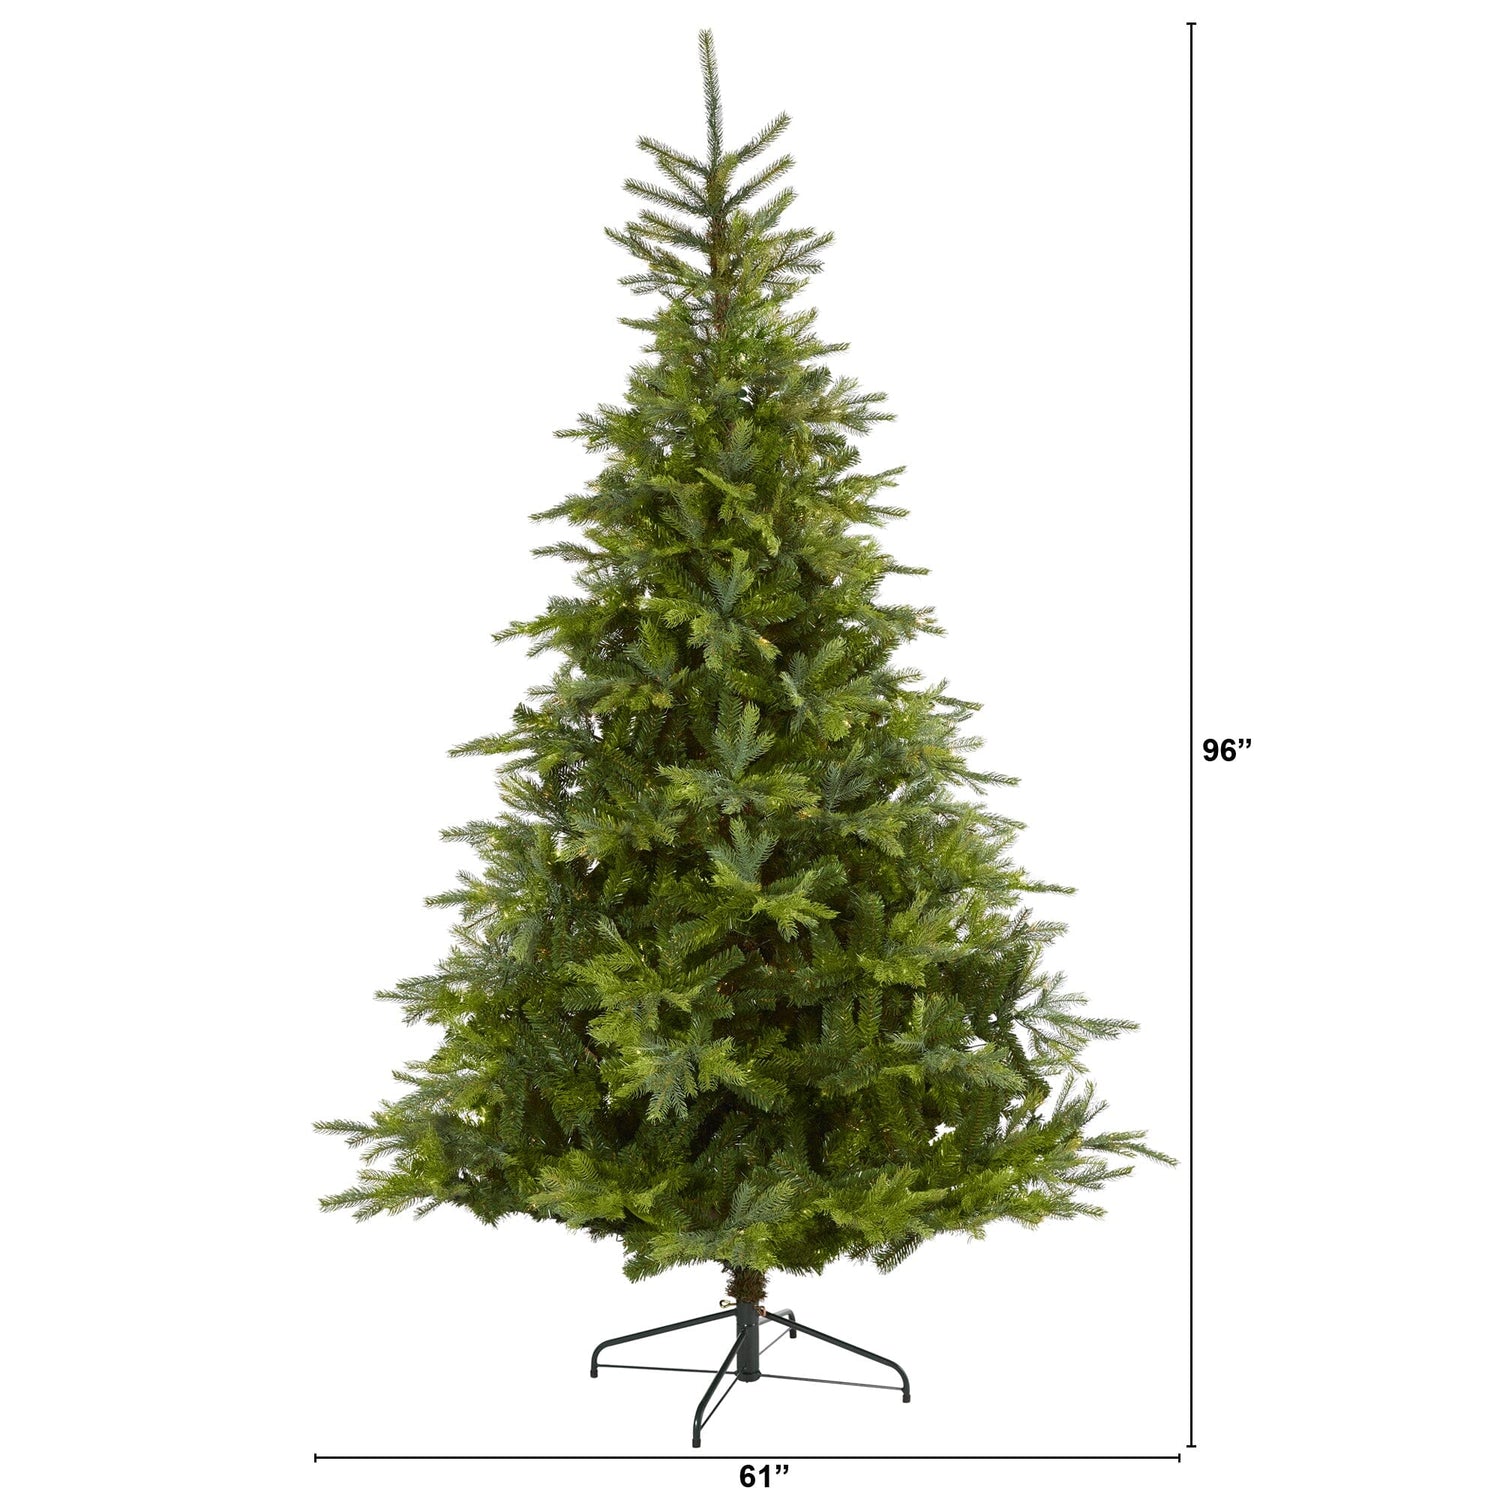 8’ North Carolina Spruce Artificial Christmas Tree with 1303 Bendable Branches